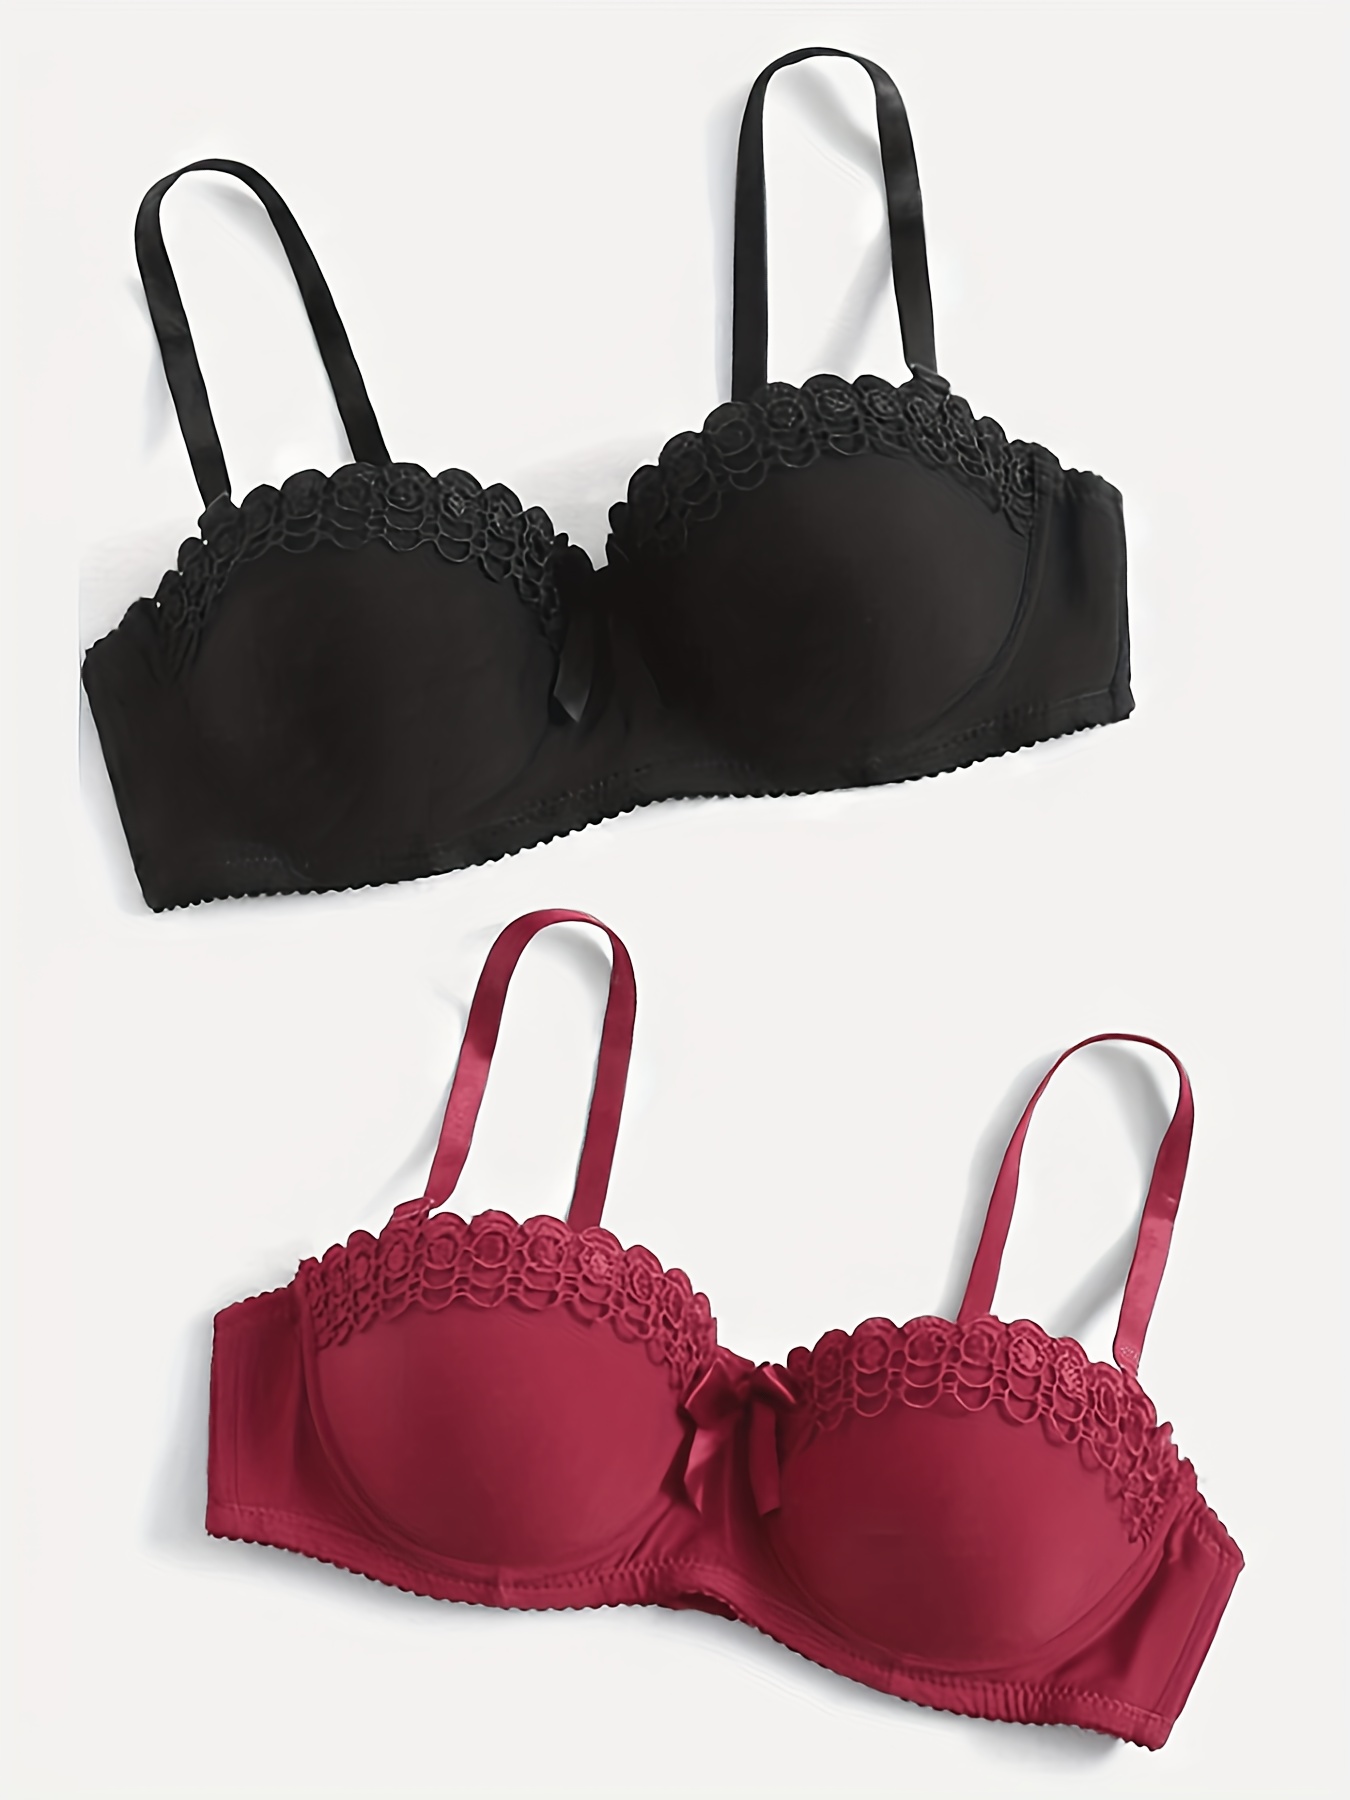 7 Reasons to Fall in Love with Lace Bras